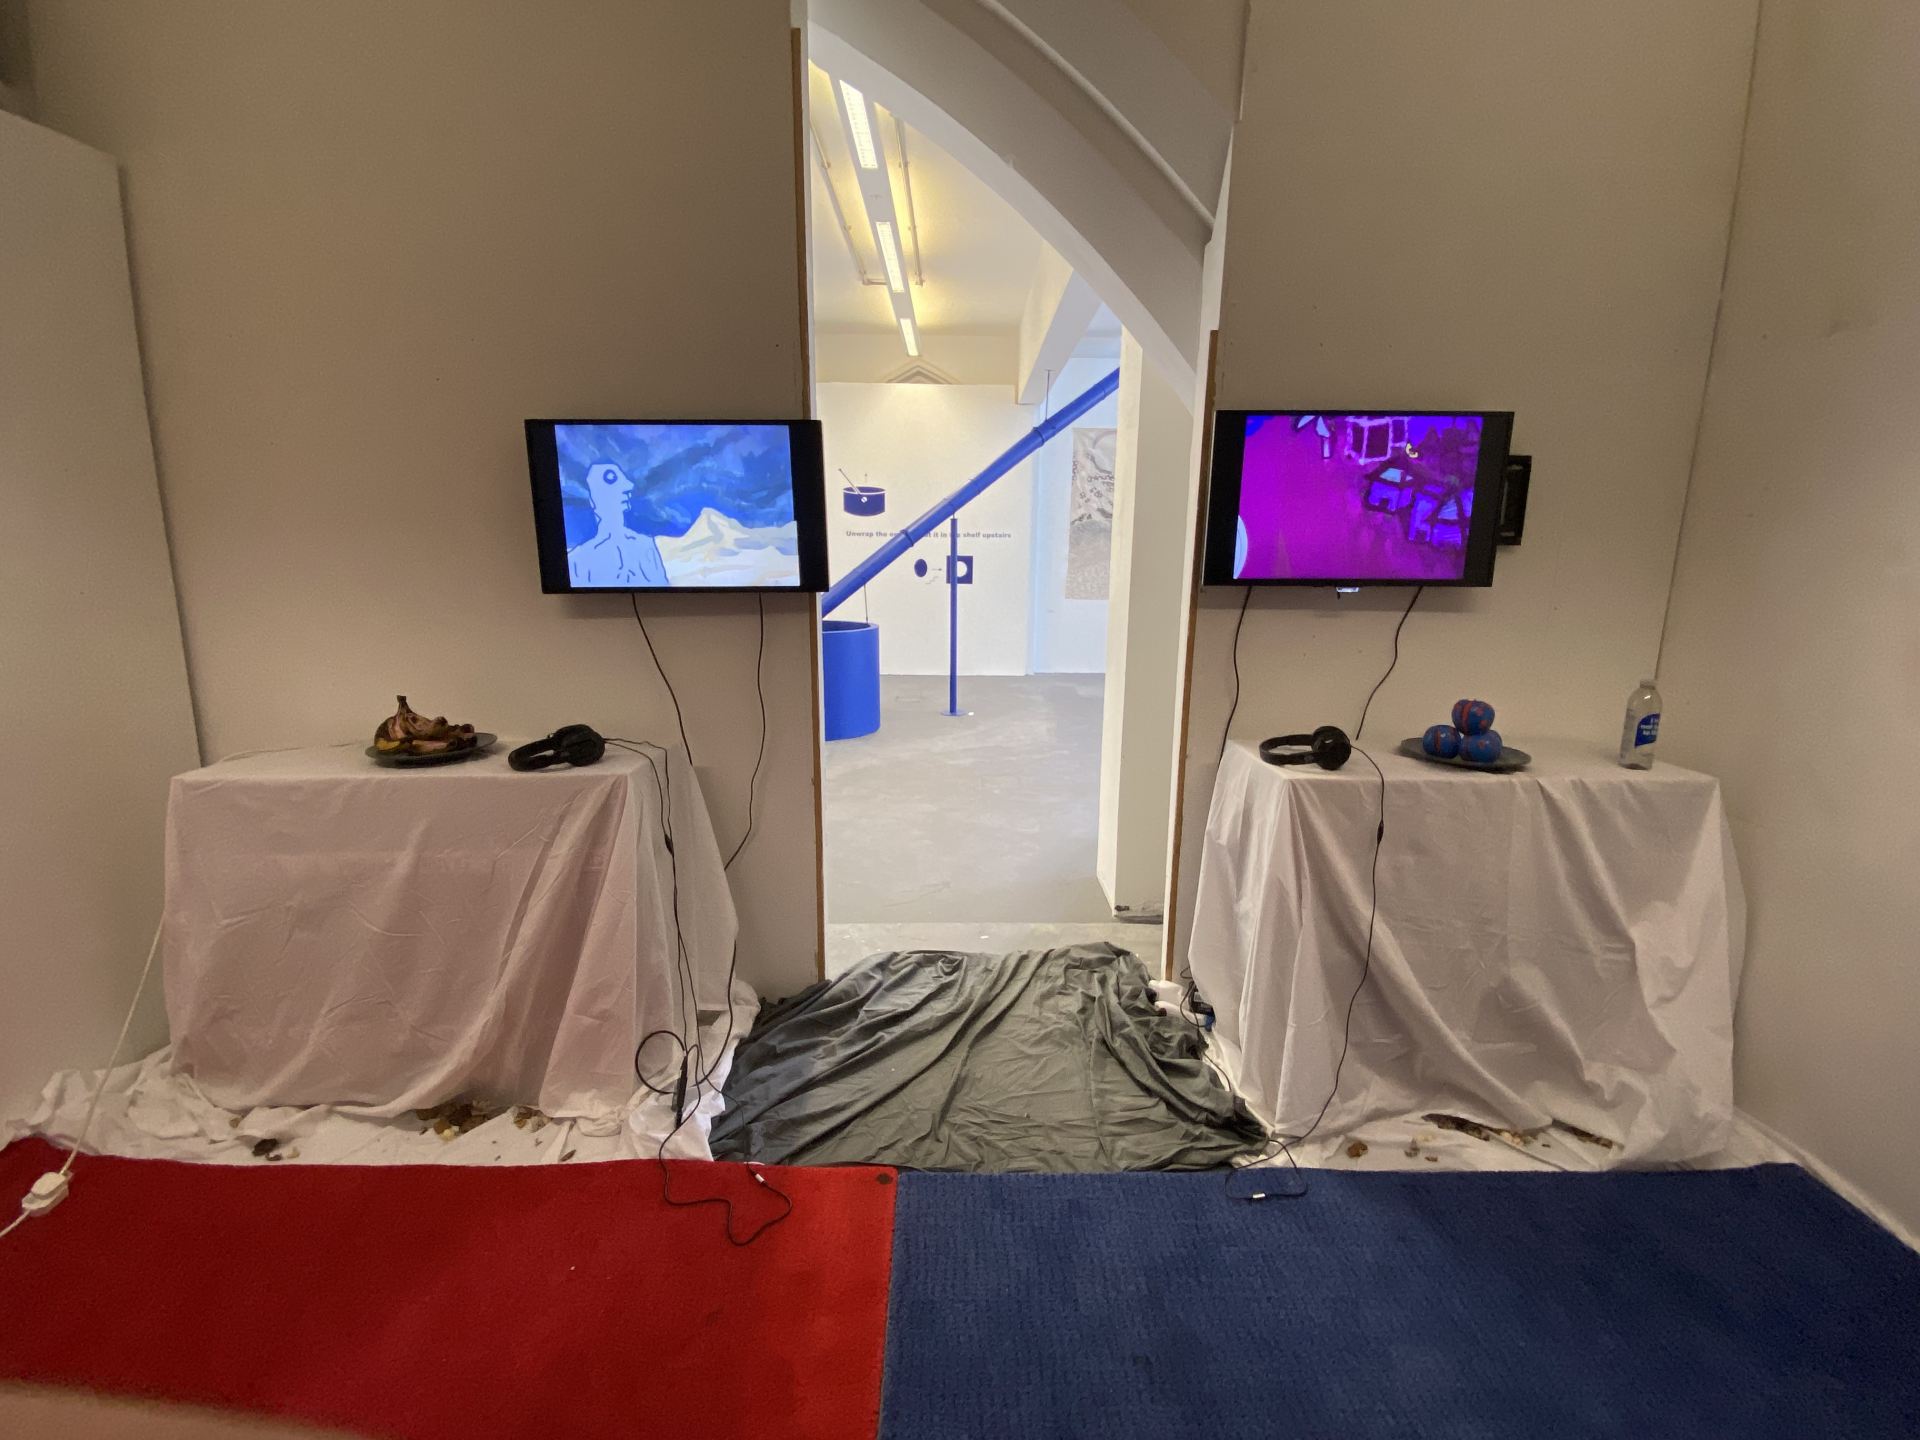 Documentation of an installation with a split red and blue carpet, with two screens on the wall showing video work.